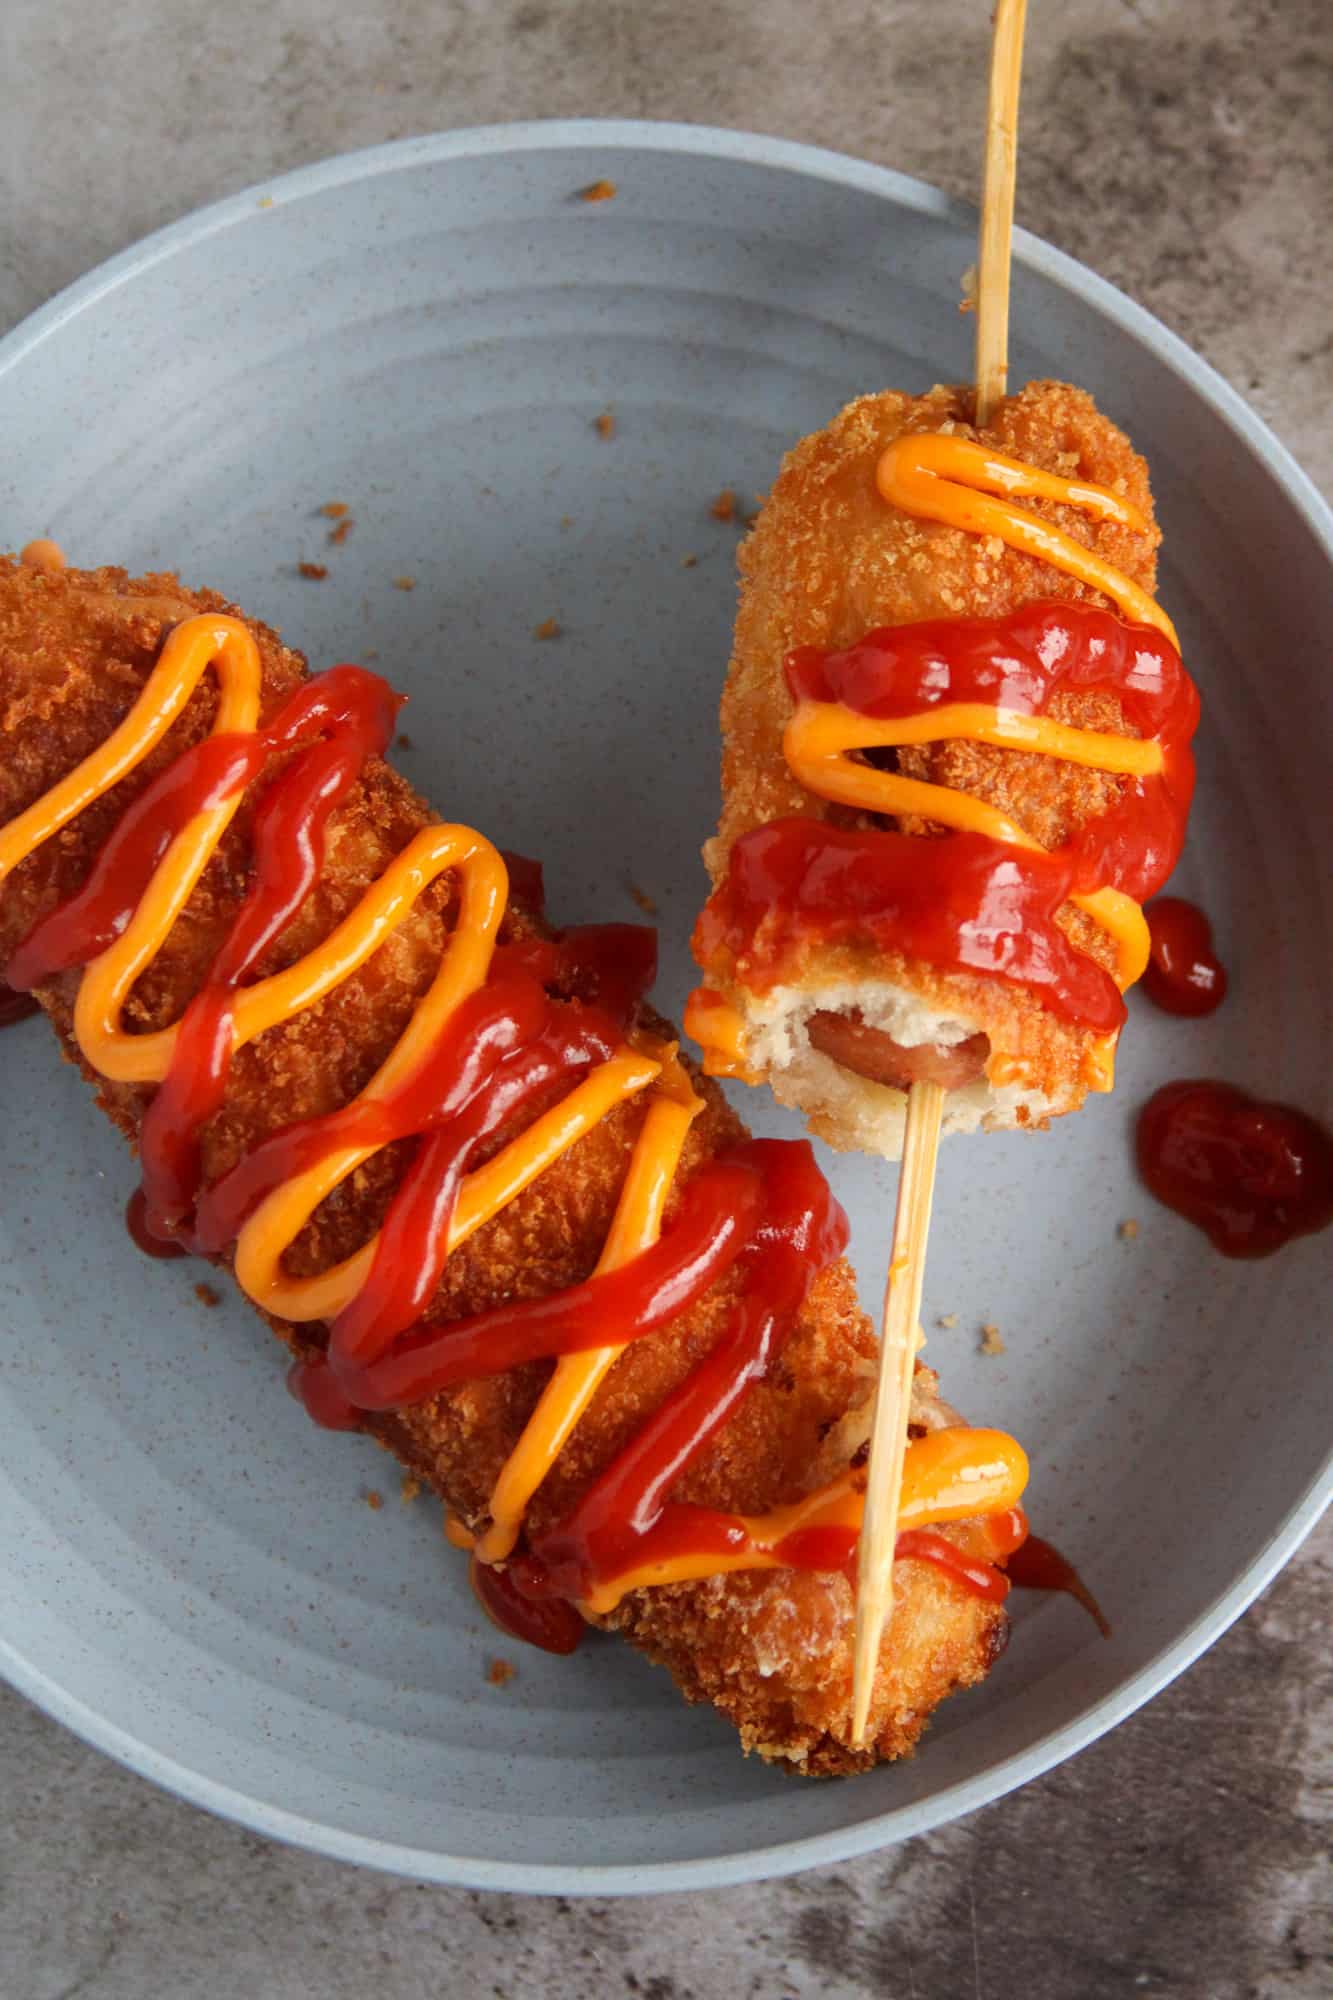 Top shot of two Korean corn dogs on a plate.